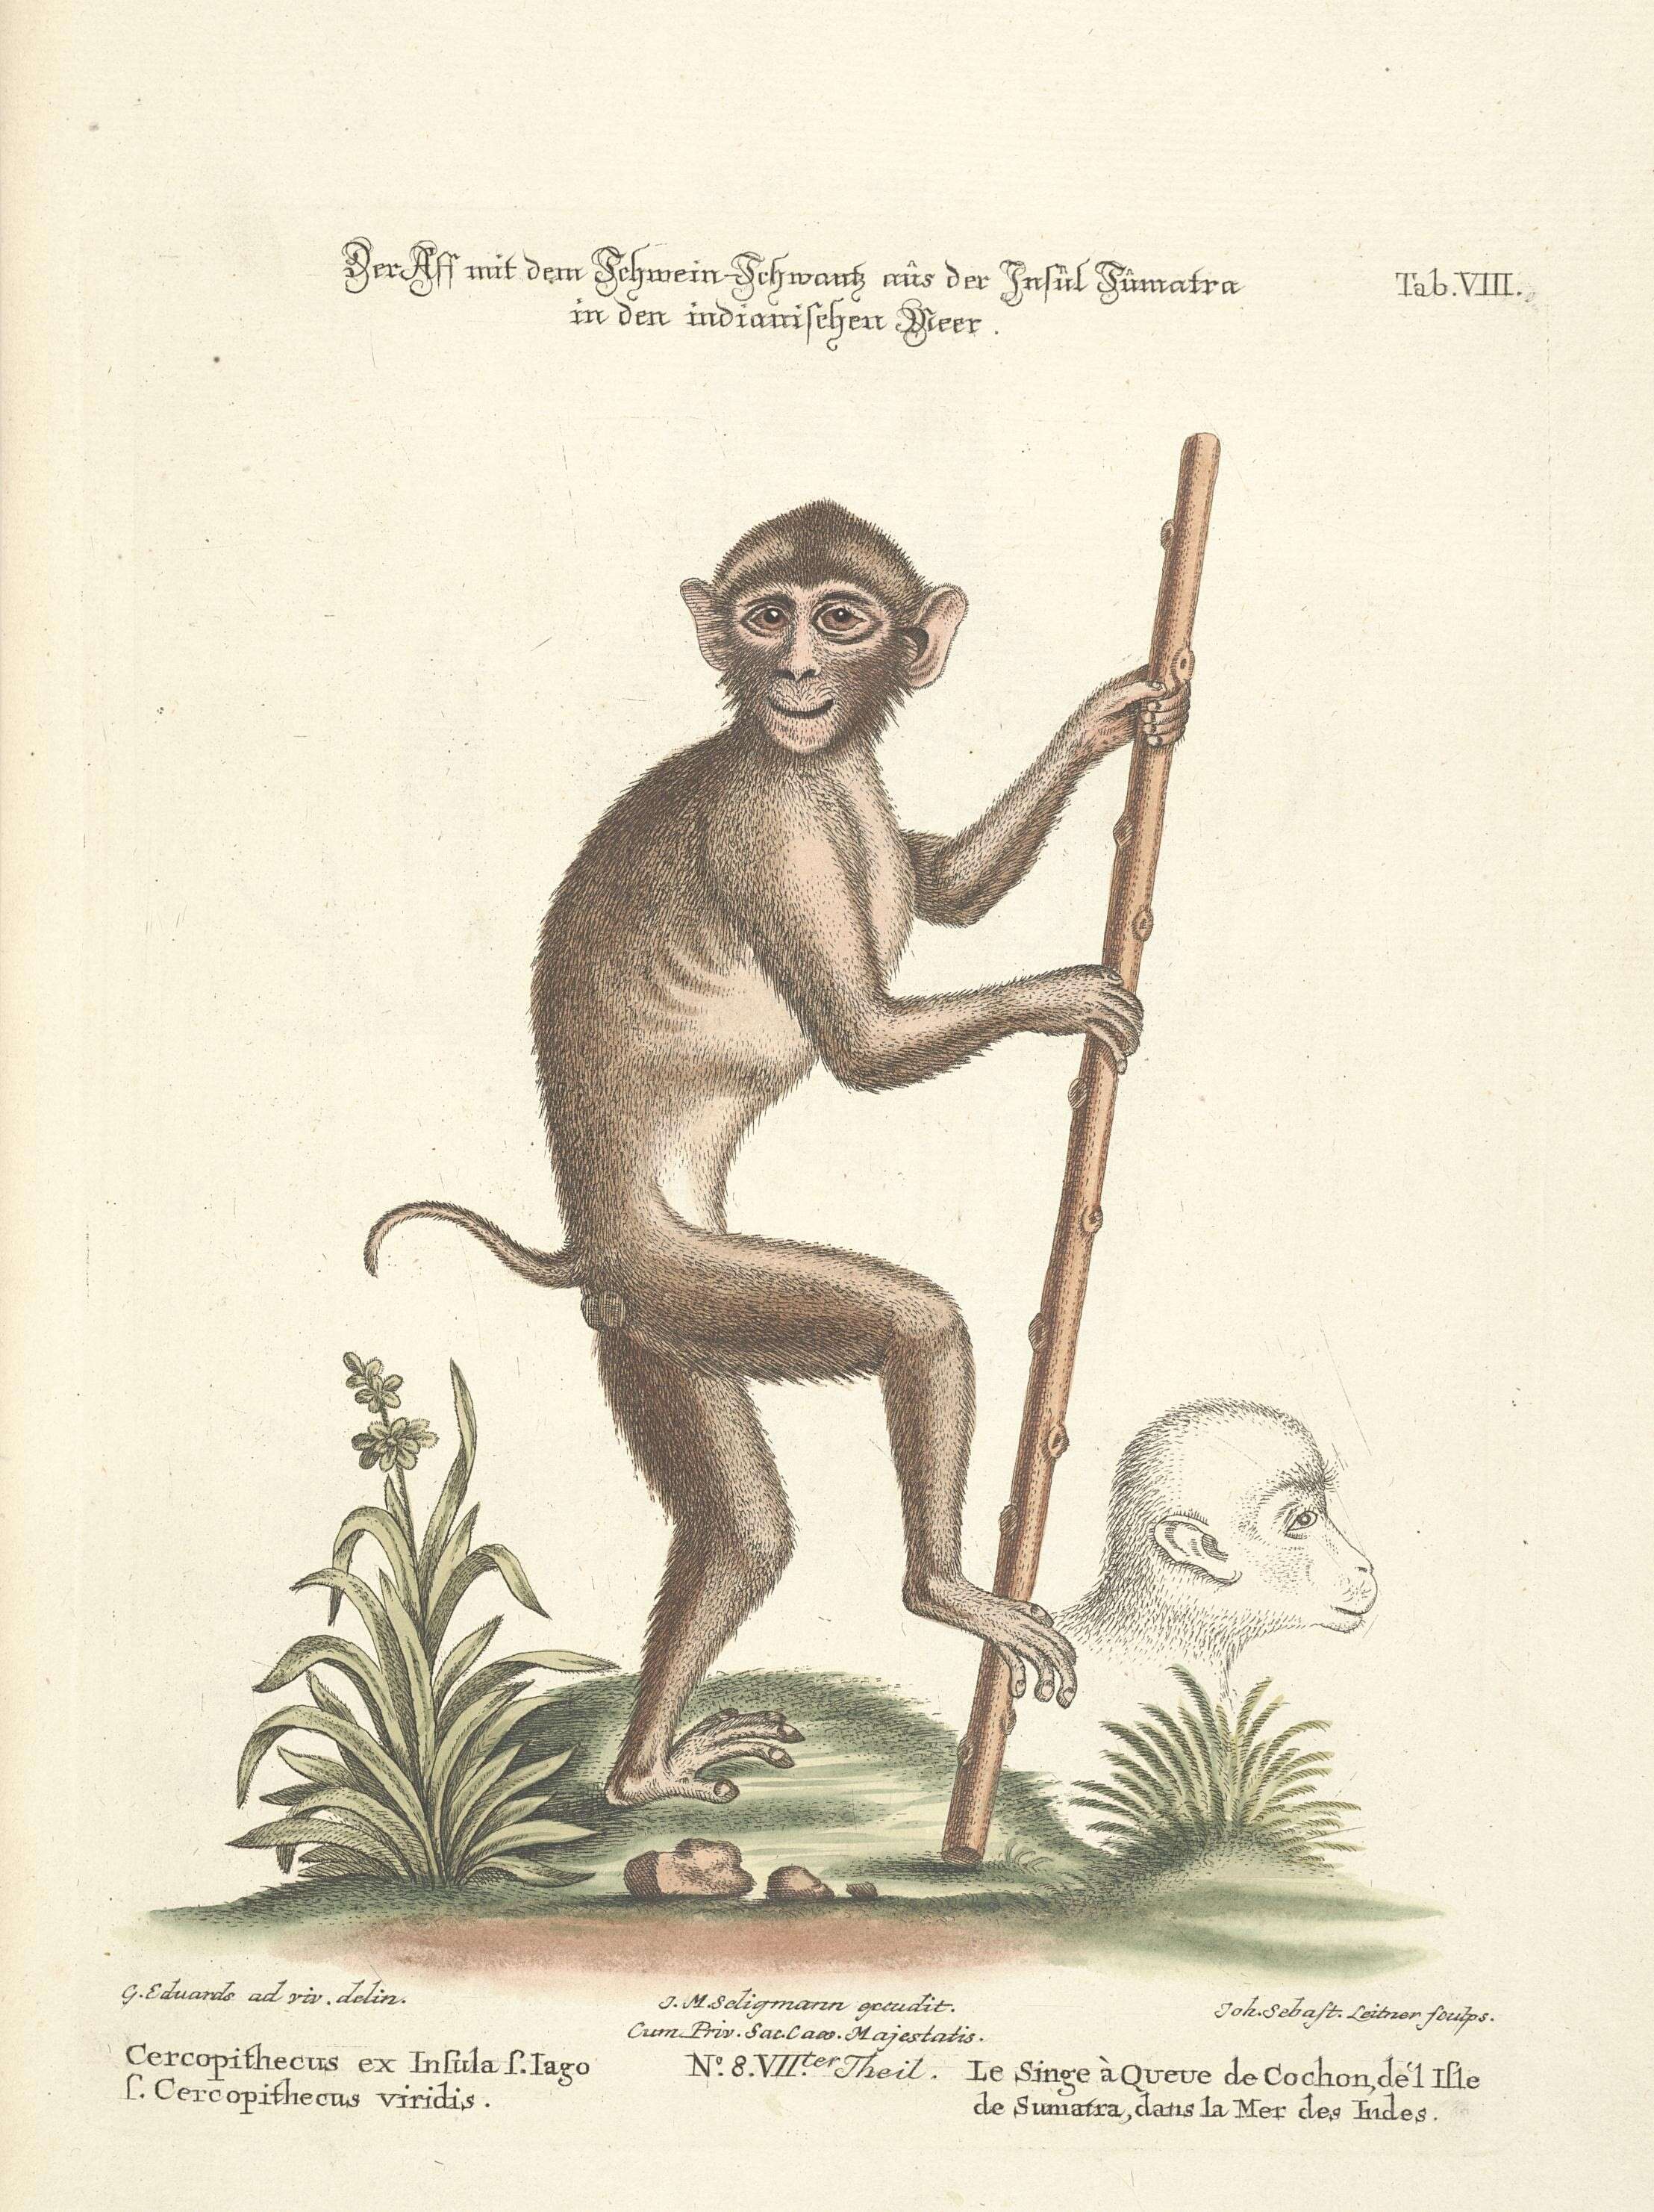 Image of Pig-Tail Macaque